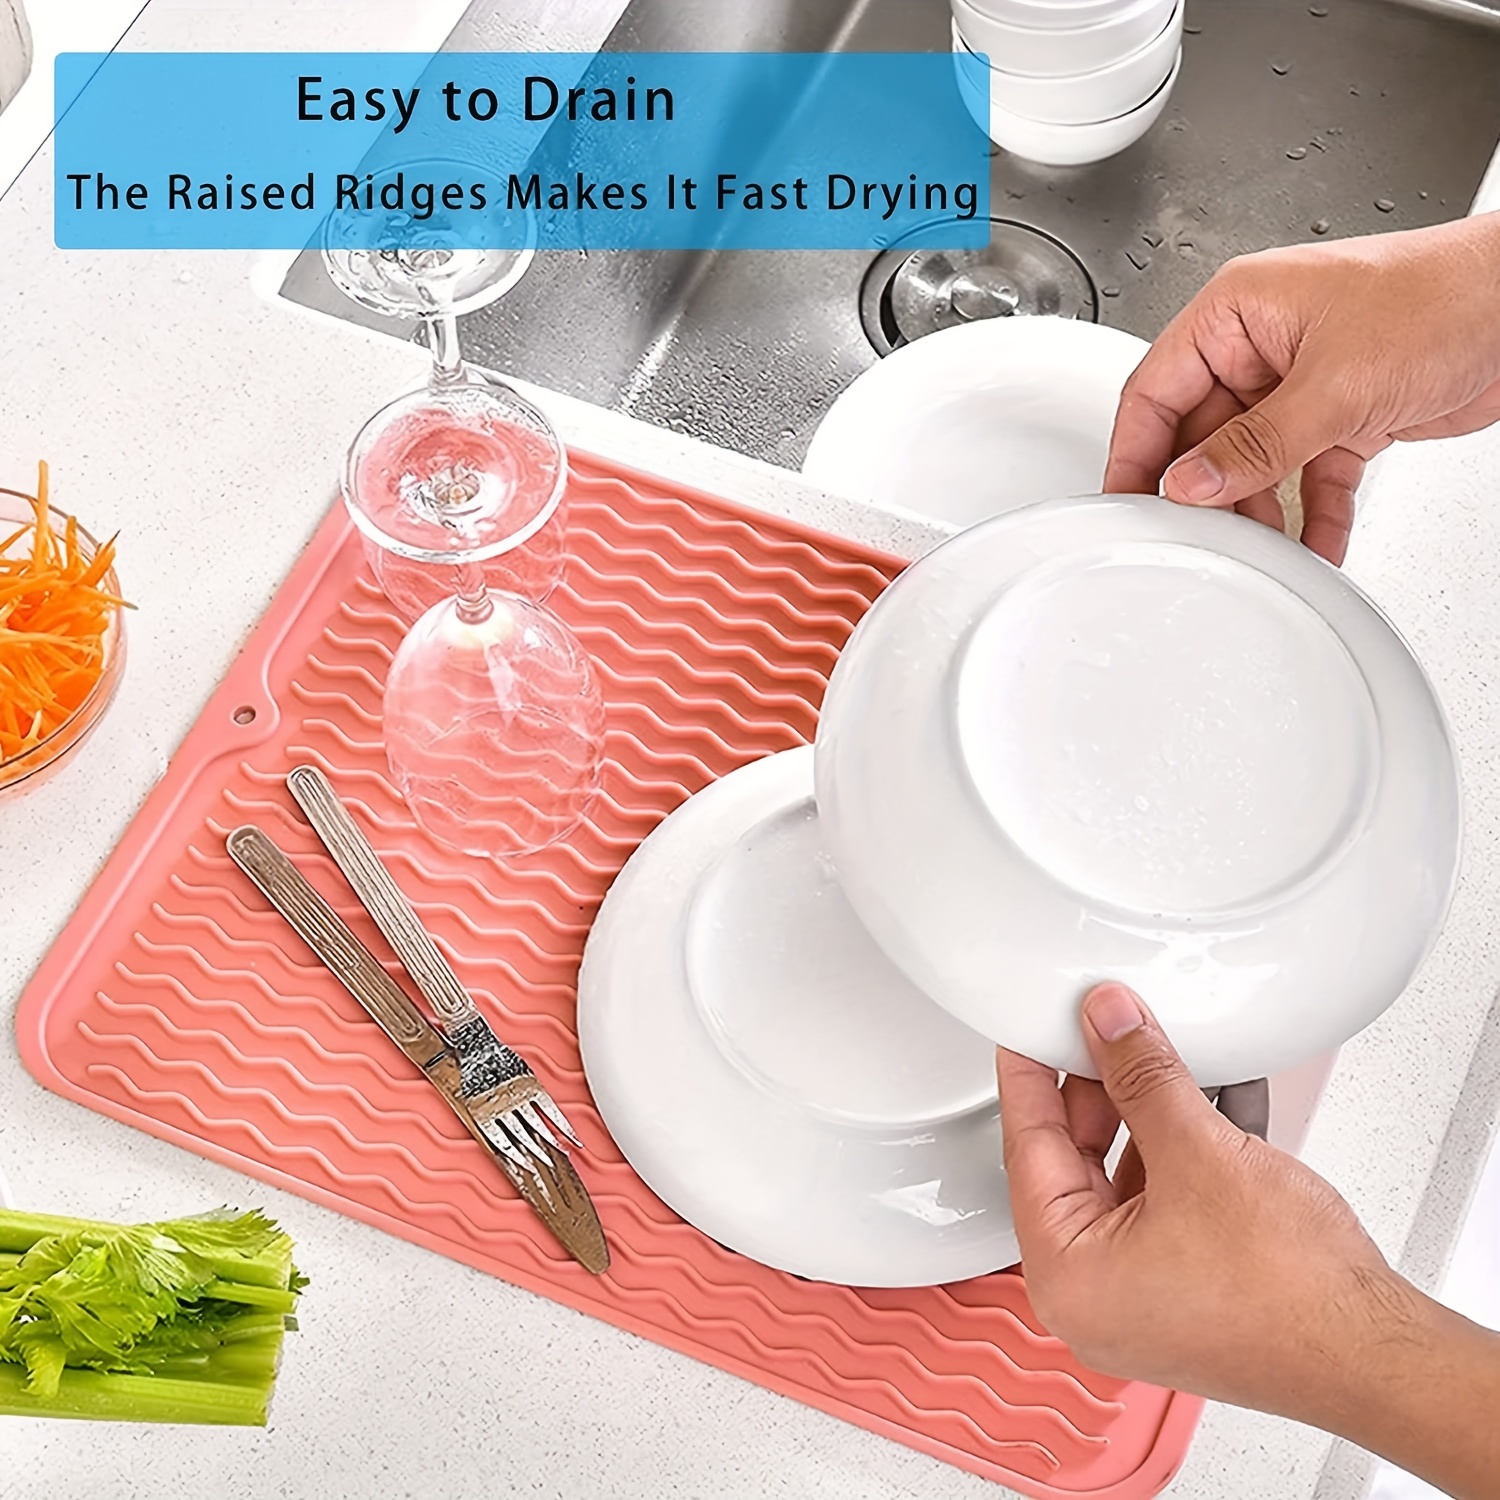 Silicone Dish Drying Mat - Drain Hole, Non-Slip, Heat Resistant, Foldable.  Great for Dishes, Kitchen Sink, Counter Top, Fridge Drawer Liner or Trivet